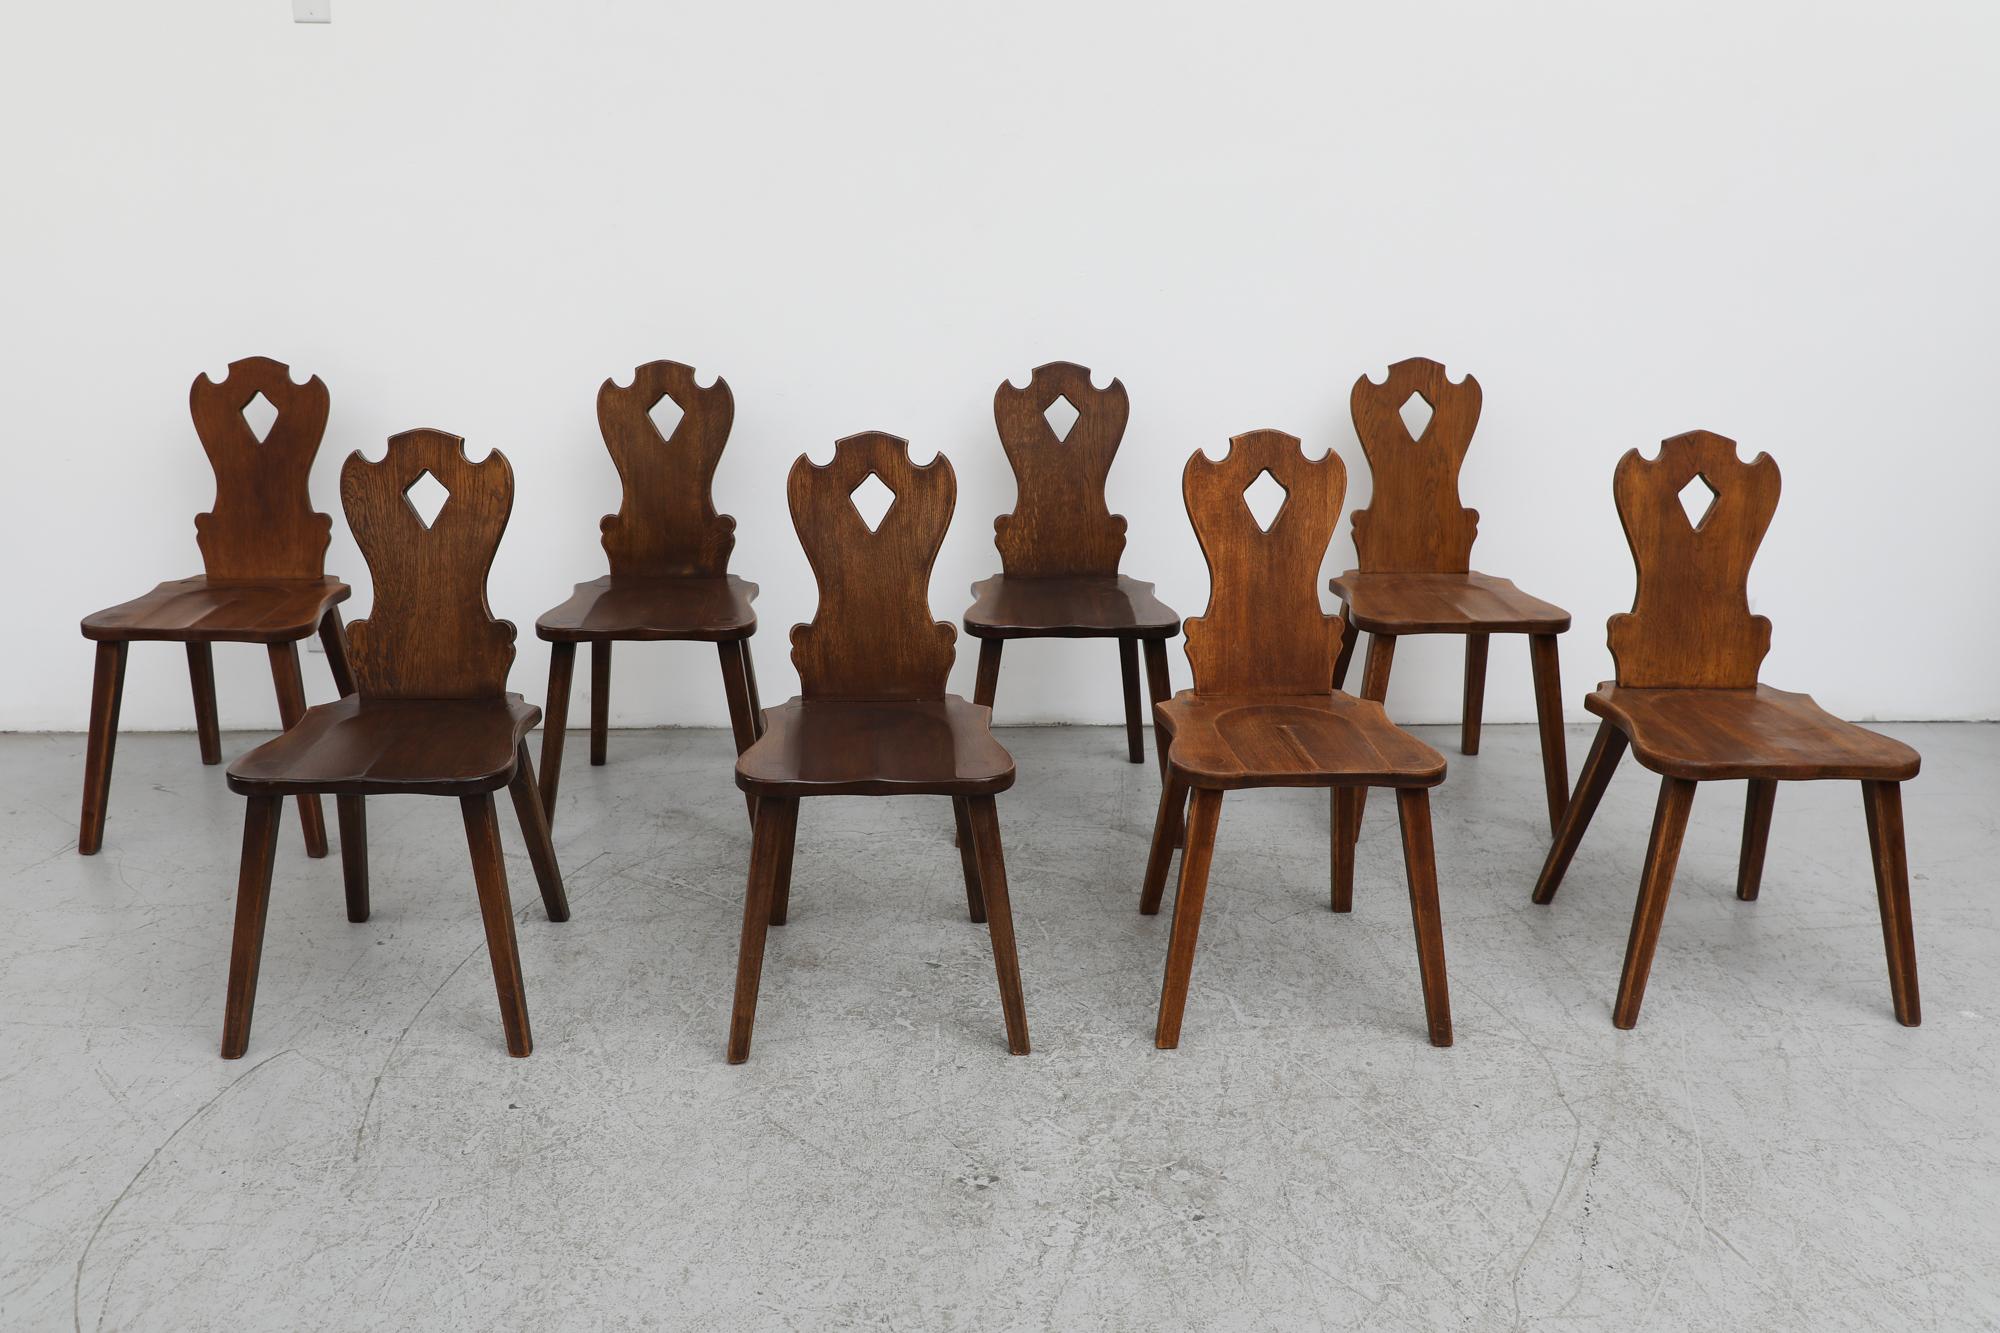 Set of 6 Brutalist hand carved, beautifully organic solid wood chairs. Stylistically something of a marriage between Tyrolean style ornate carving and a more sleek mid century esthetic. This set is in mostly original condition with visible wear